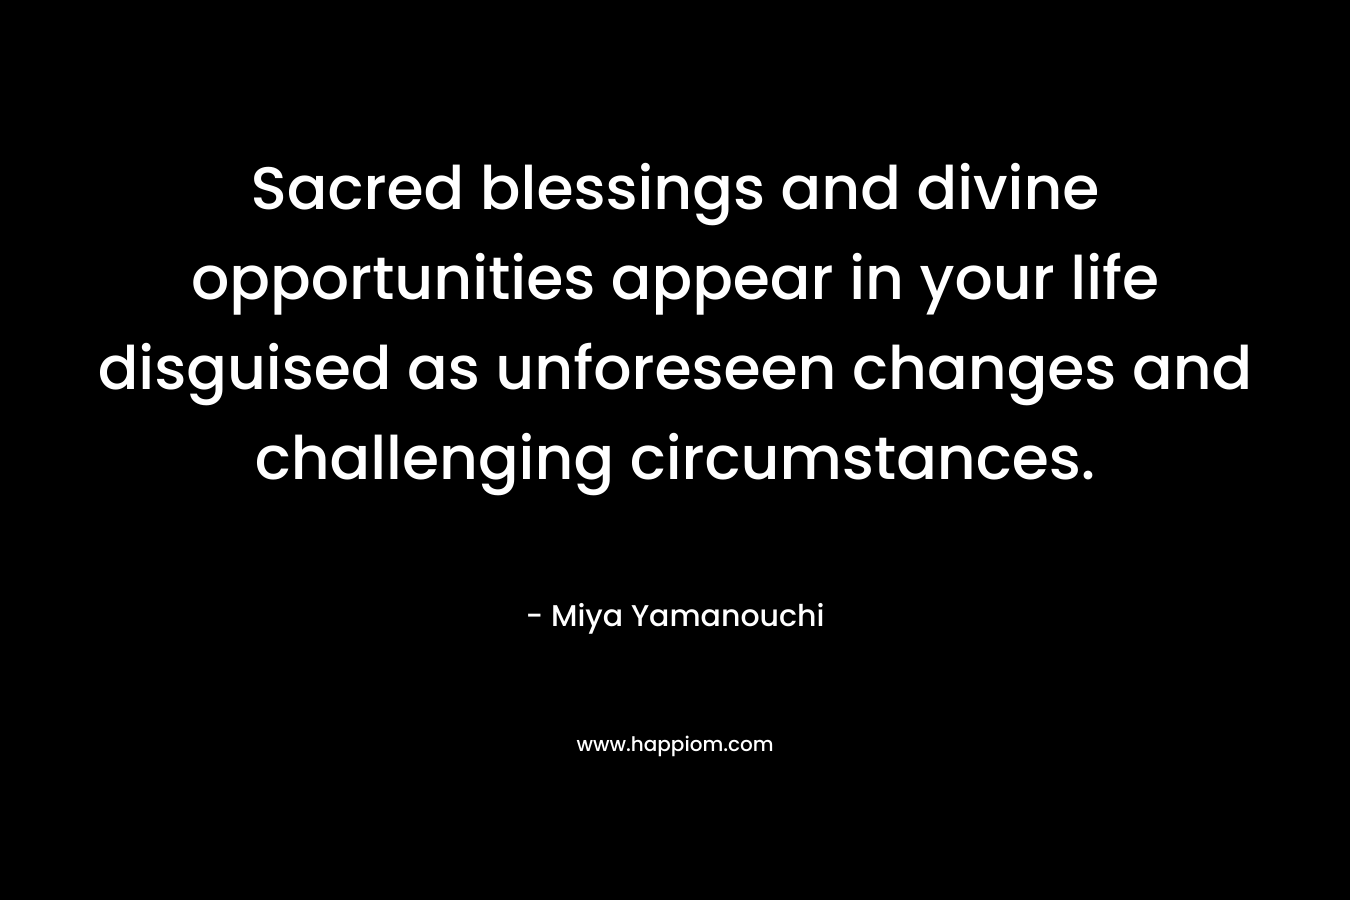 Sacred blessings and divine opportunities appear in your life disguised as unforeseen changes and challenging circumstances.